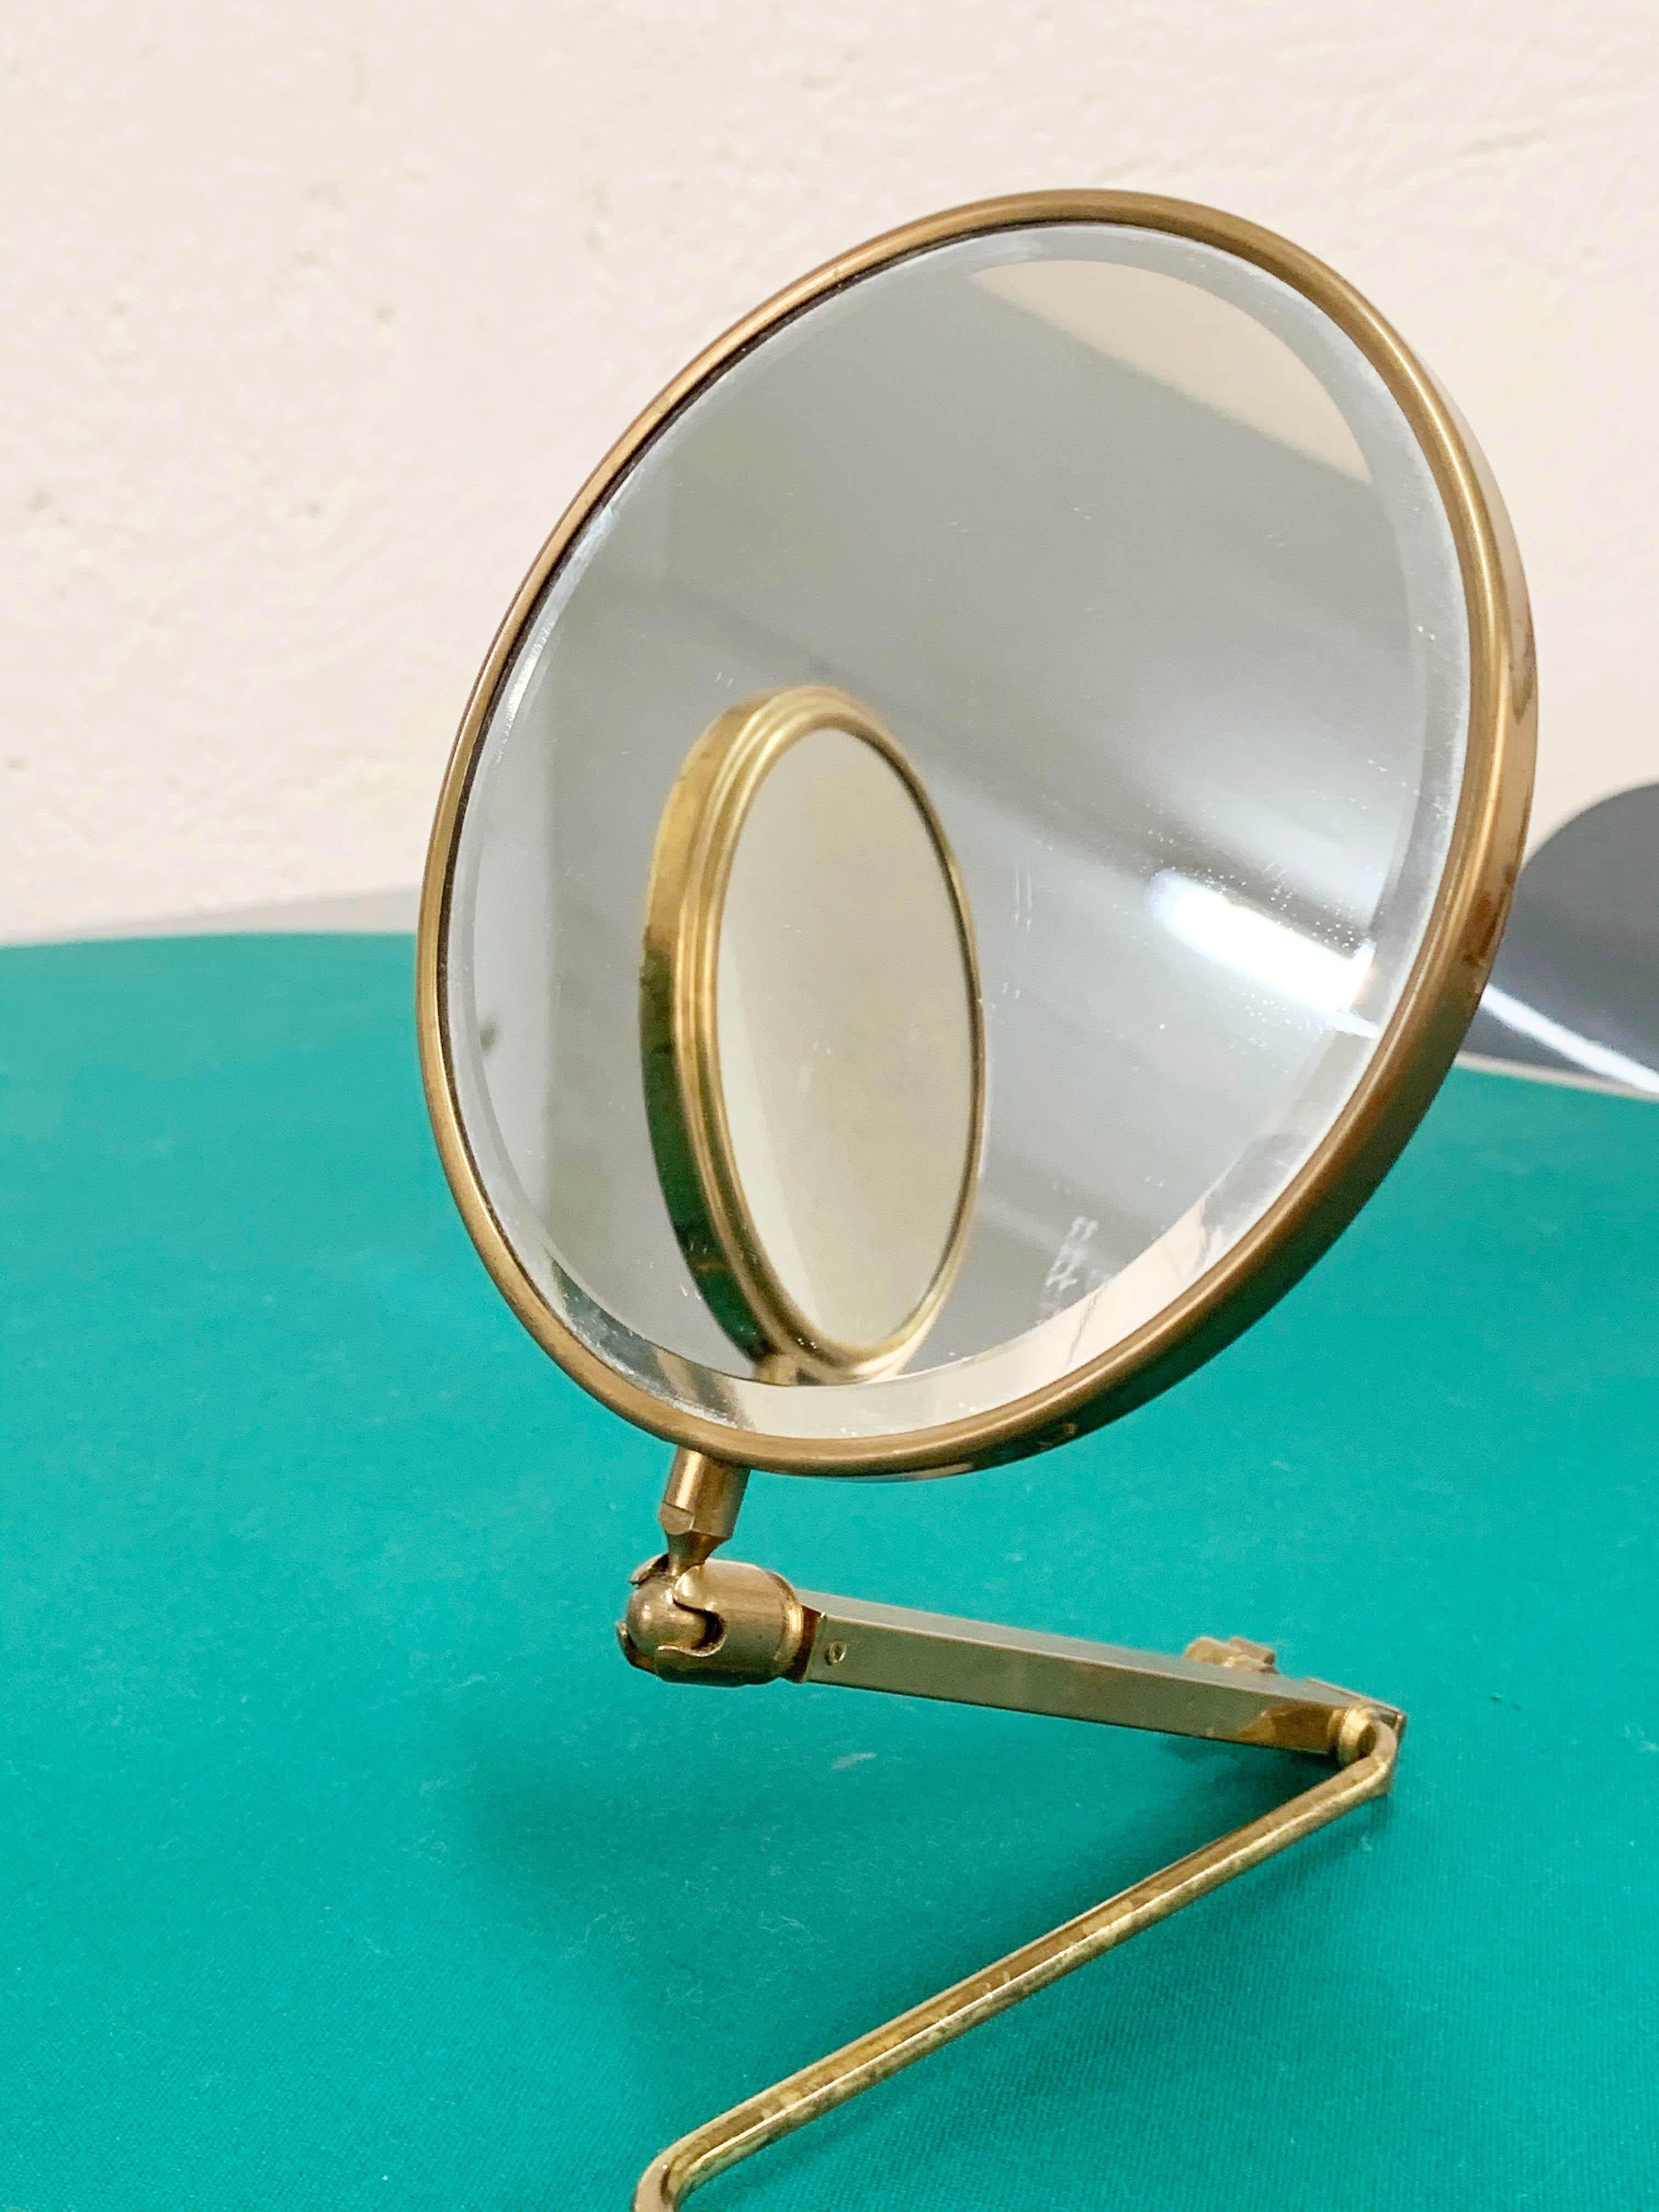 20th Century Midcentury Brass French Adjustable Table Mirror with a Two-Sides Stand, 1950s For Sale